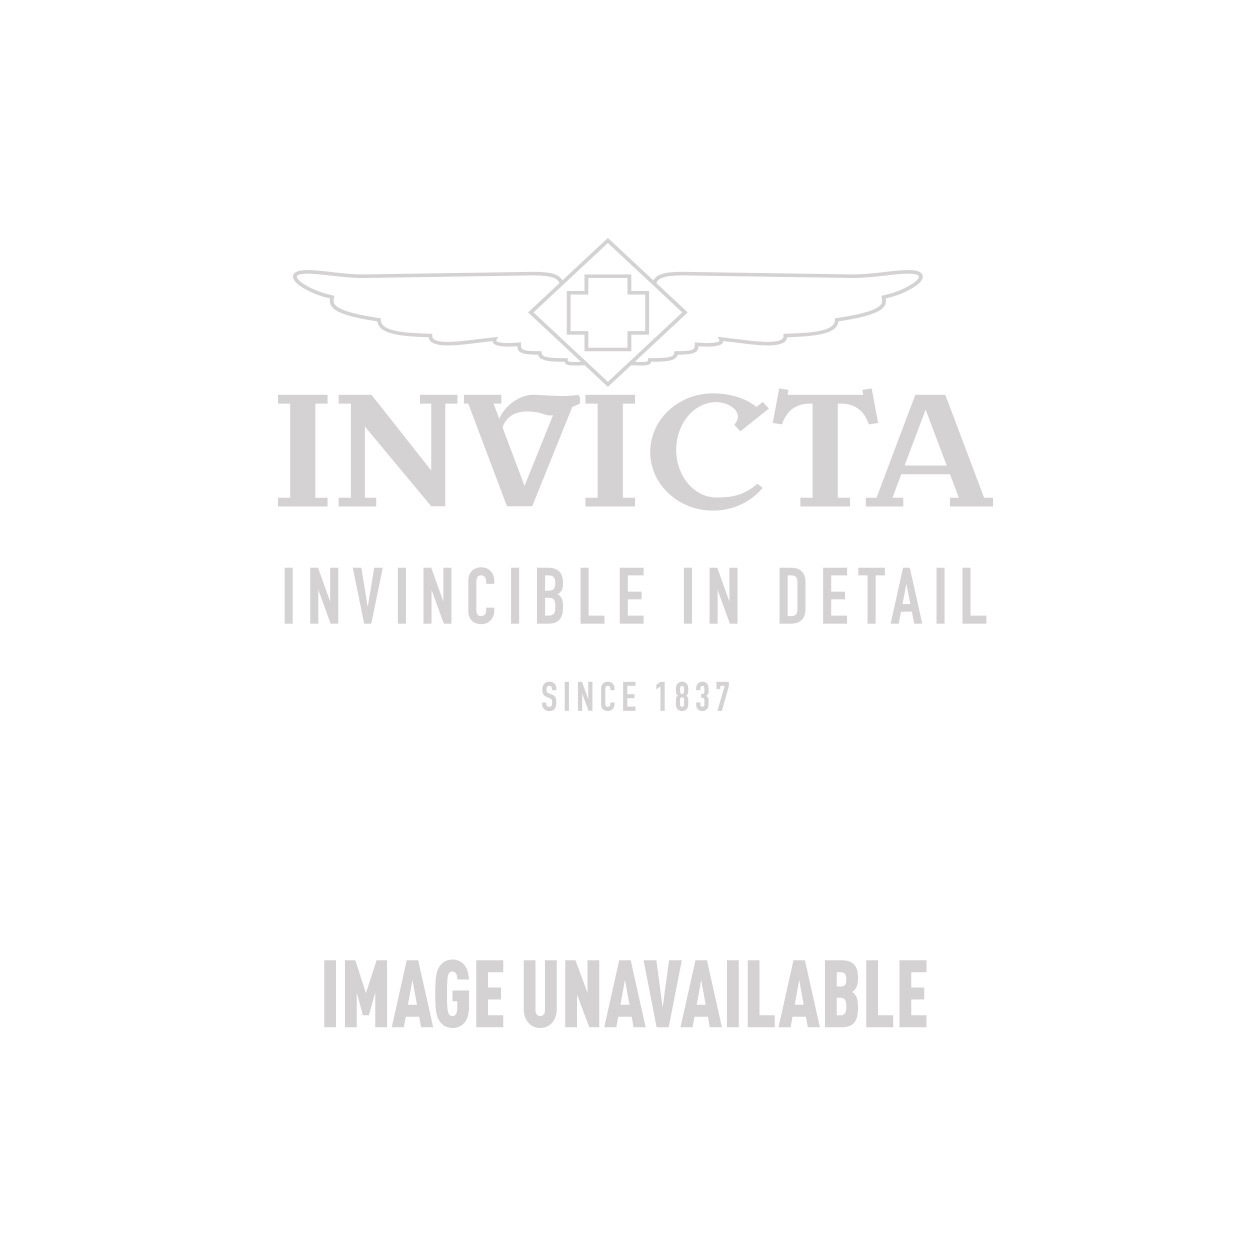 Invicta Specialty Mens Quartz 45mm Stainless Steel case Stainless Steel band - Model 0620